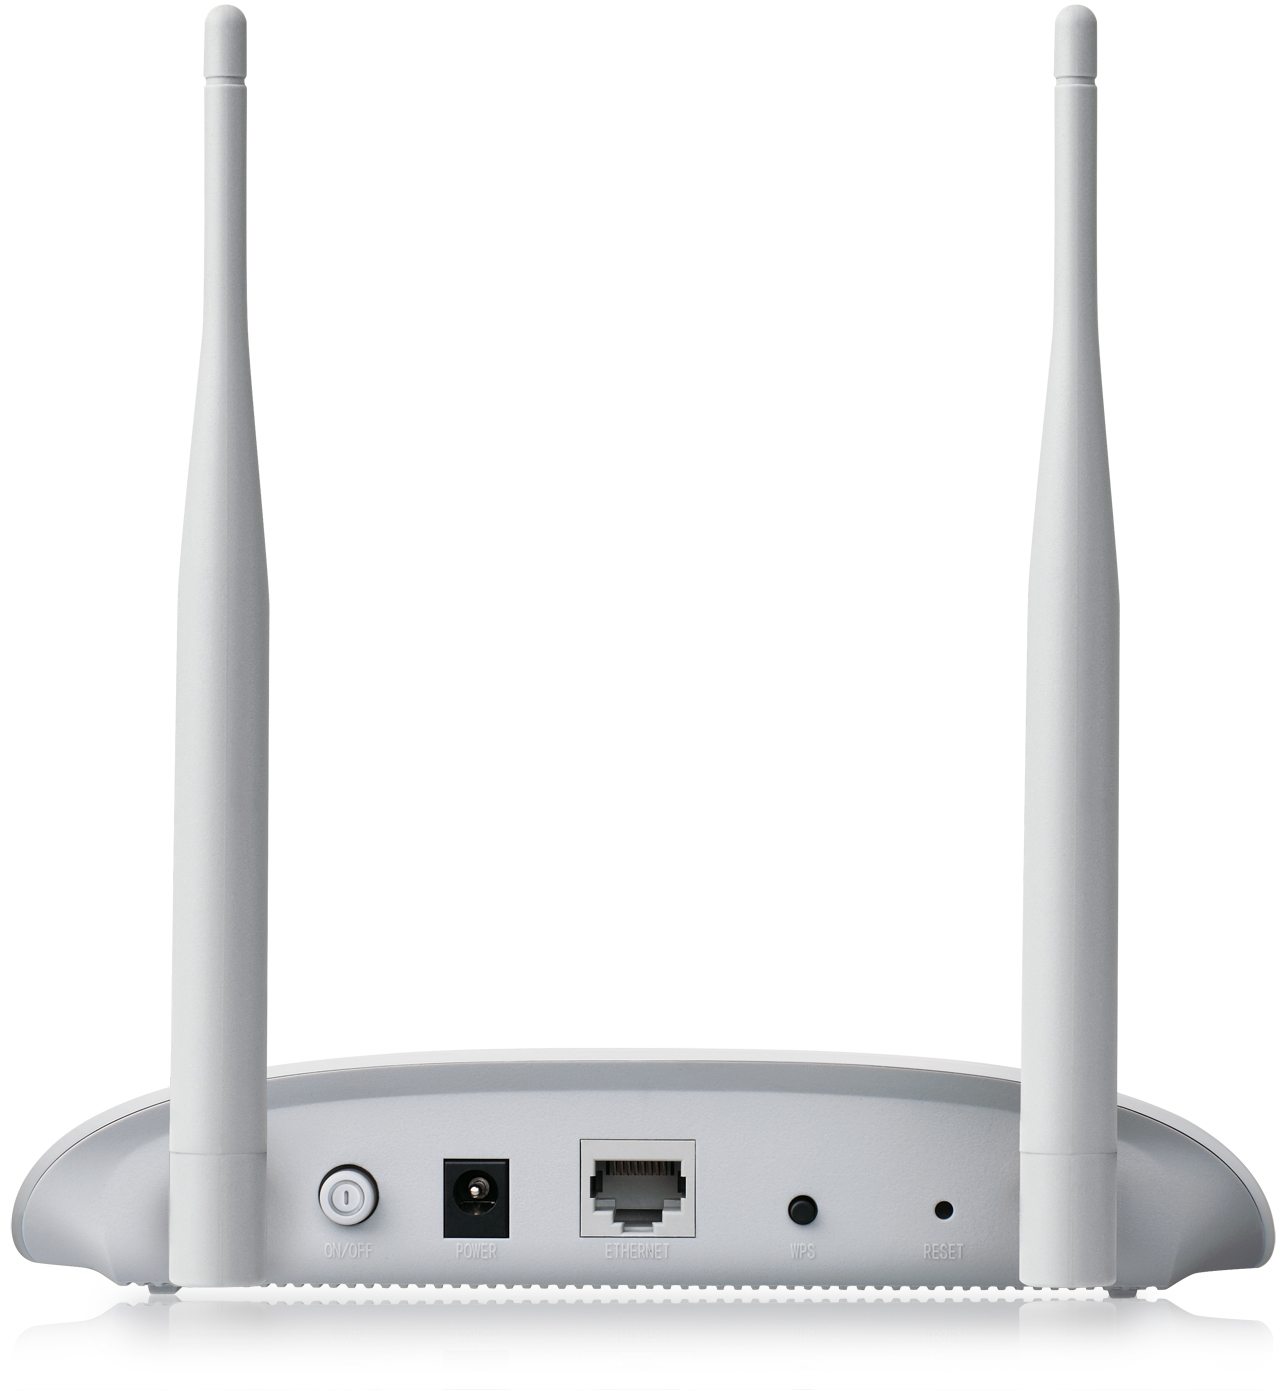 Hard reset TP-LINK TL-WA22ND - How to Hard Reset Your Router